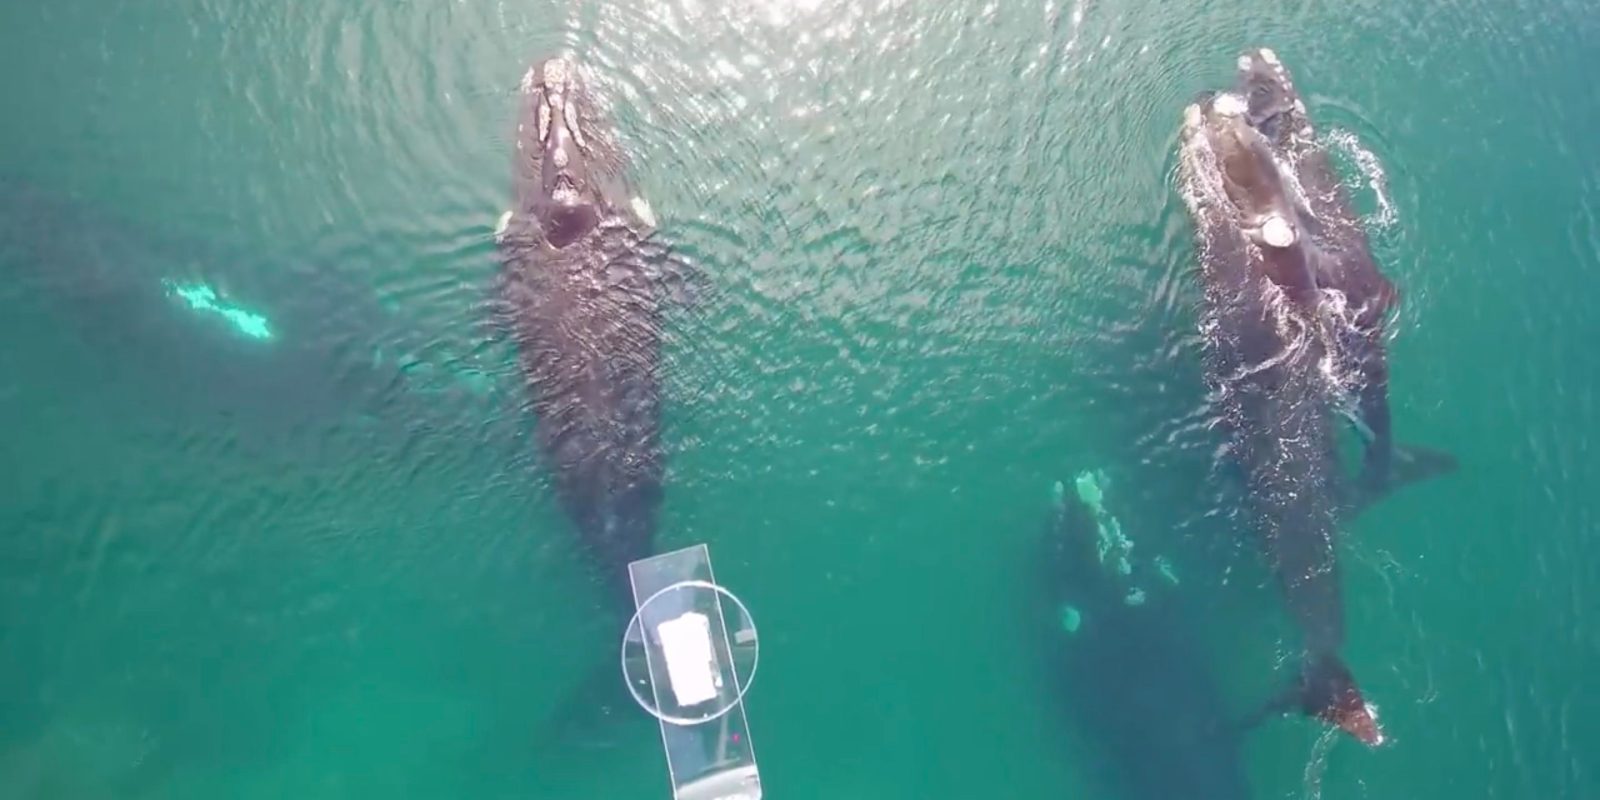 Marine biologists use DJI Inspire to collect whale snot